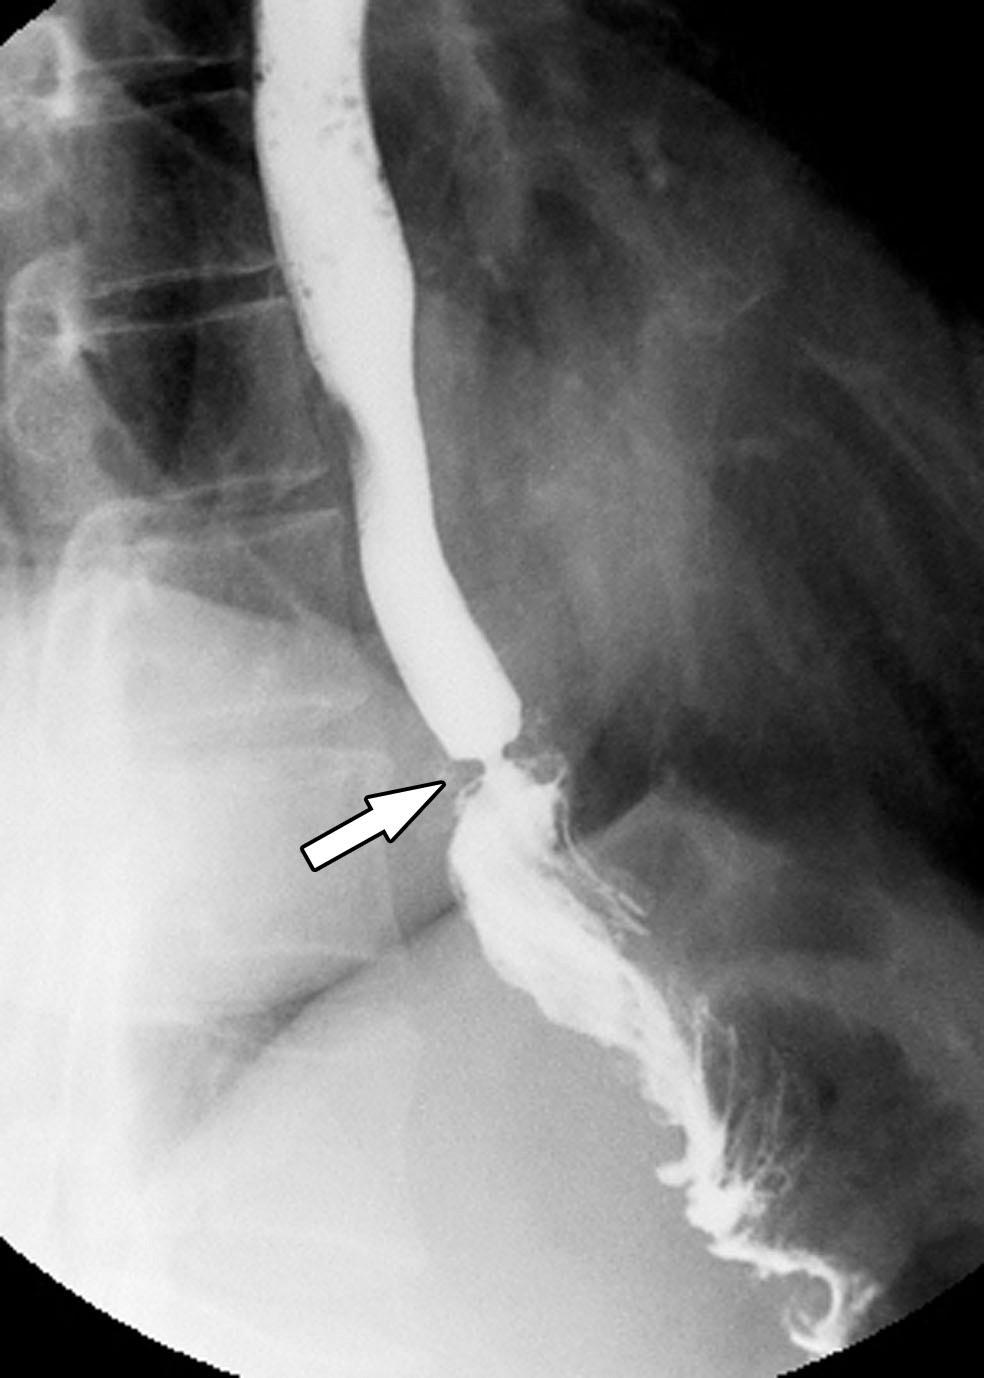 Kim et al. Fig. 3. Fluoroscopically guided balloon dilation for anastomotic stricture at esophagojejunostomy.